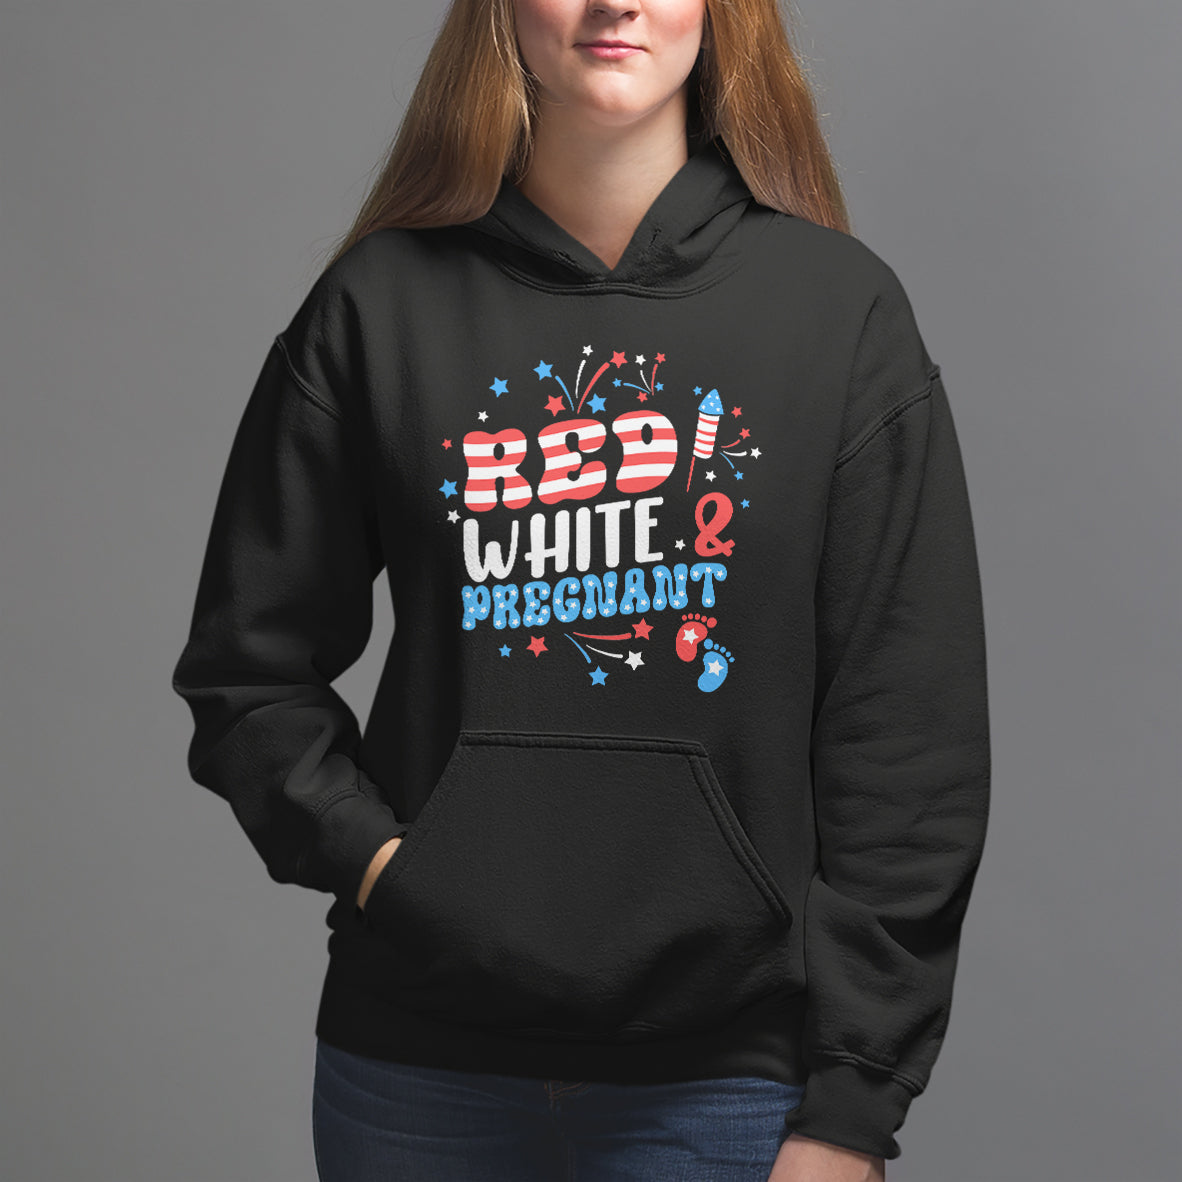 pregnancy-announcement-hoodie-red-white-and-due-4th-of-july